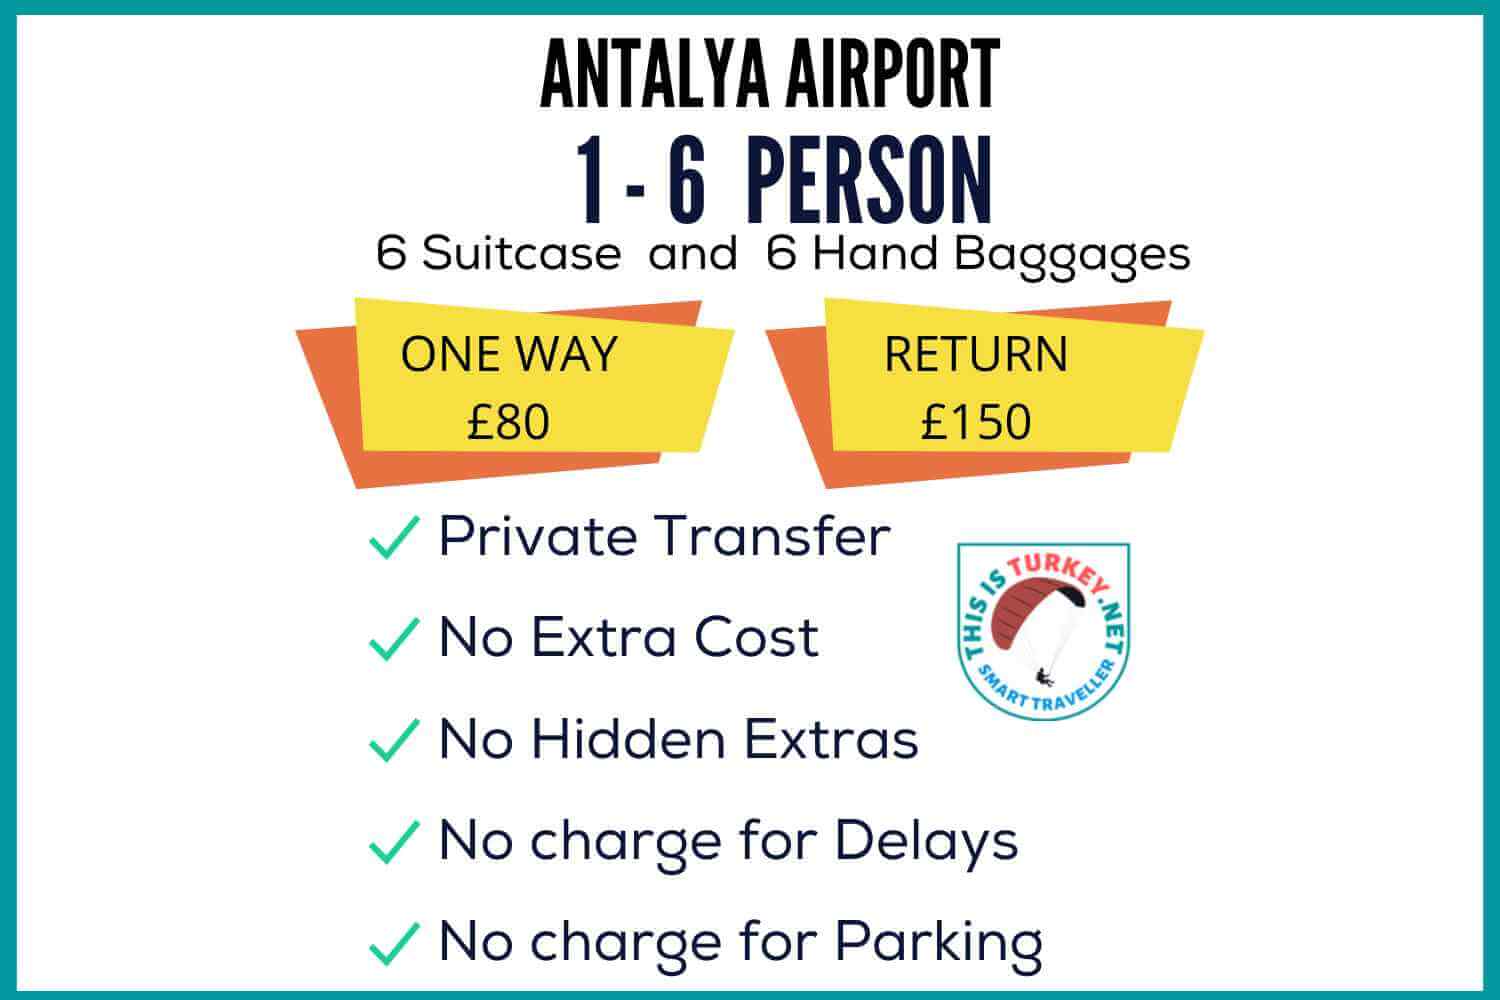 Our Private Transfer service to Hotels in from Antalya Airport comes with no extra cost and hidden extras. All our Airport Transfer vehicles are comfortable and Airconditioned, and drivers are experienced locals.